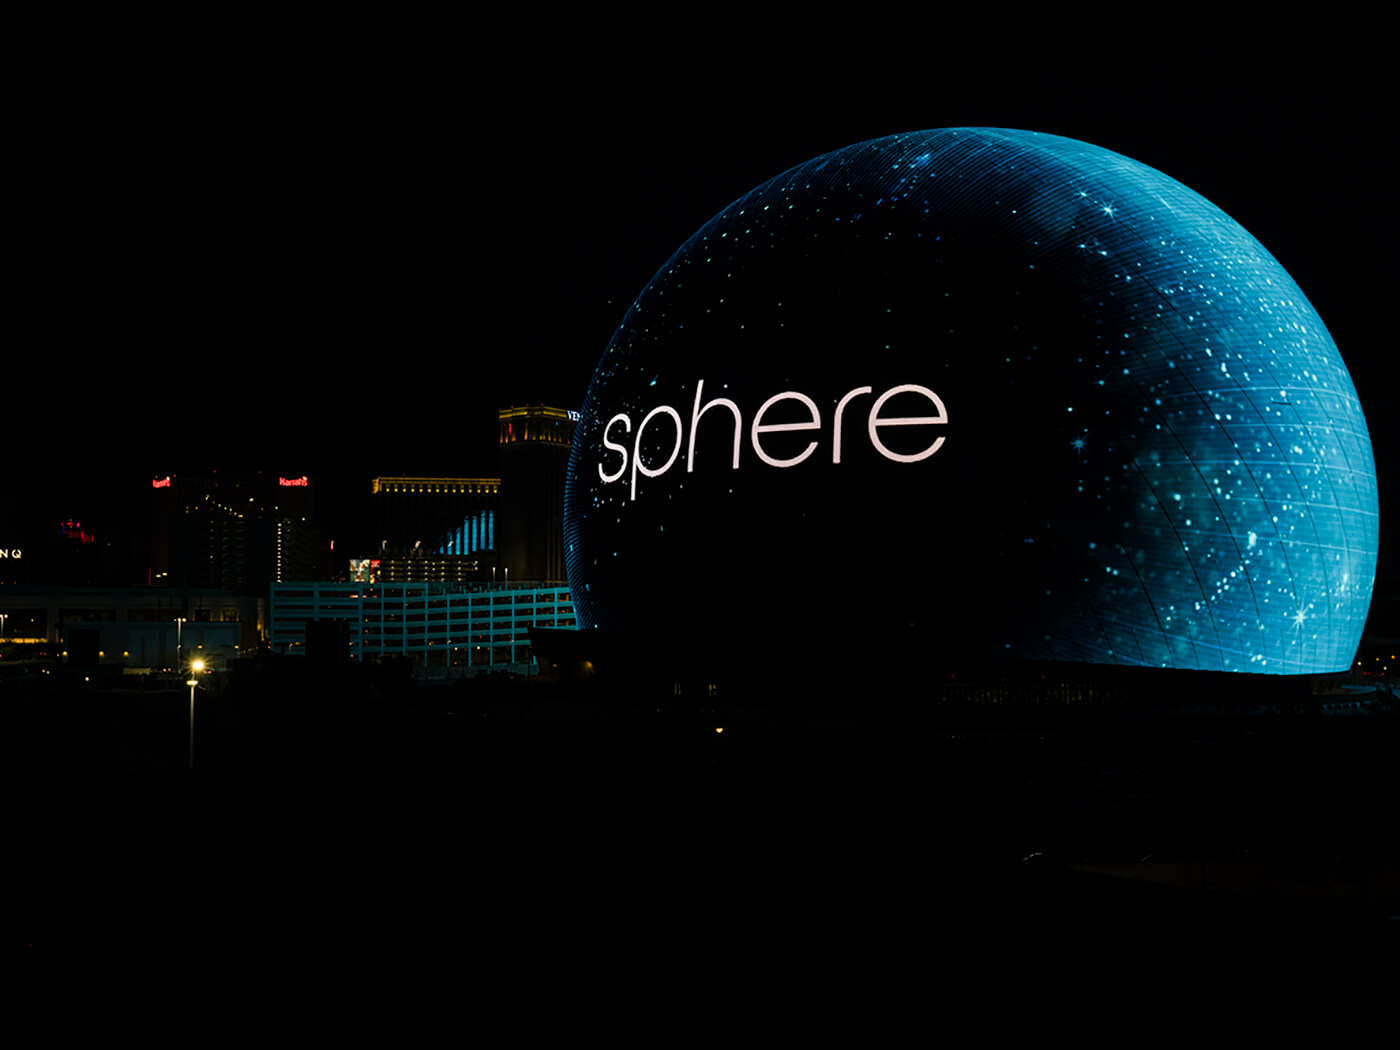 The Sphere lights up for the first time in Las Vegas in celebration of Independence Day on July 4, 2023, photo by Greg Doherty/Getty Images